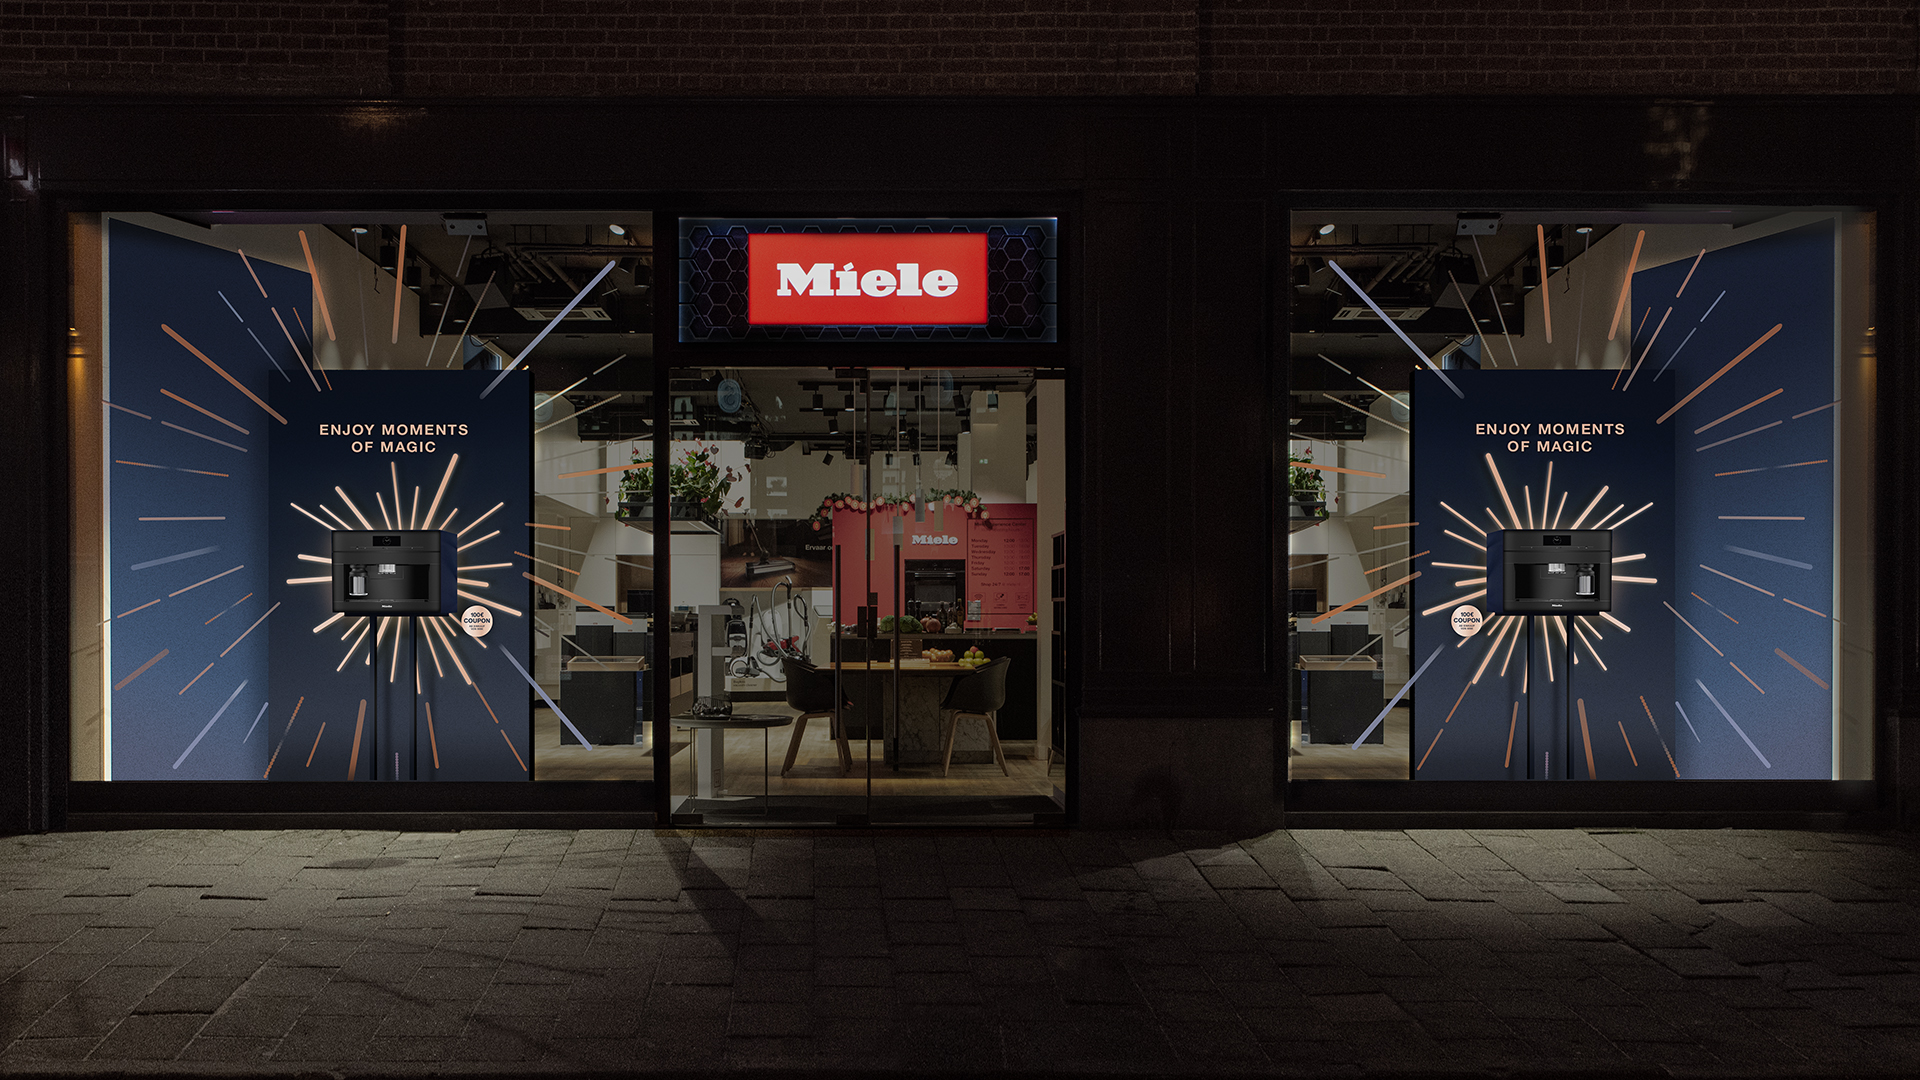 Dfrost, Miele, Window Campaigns, Window Campaign, POS Campaign, Window Rollout, Retail Marketing Campaign, Household appliances, Christmas, Visual Merchandising, Strategic Visual Merchandising, Christmas Design Window Campaign